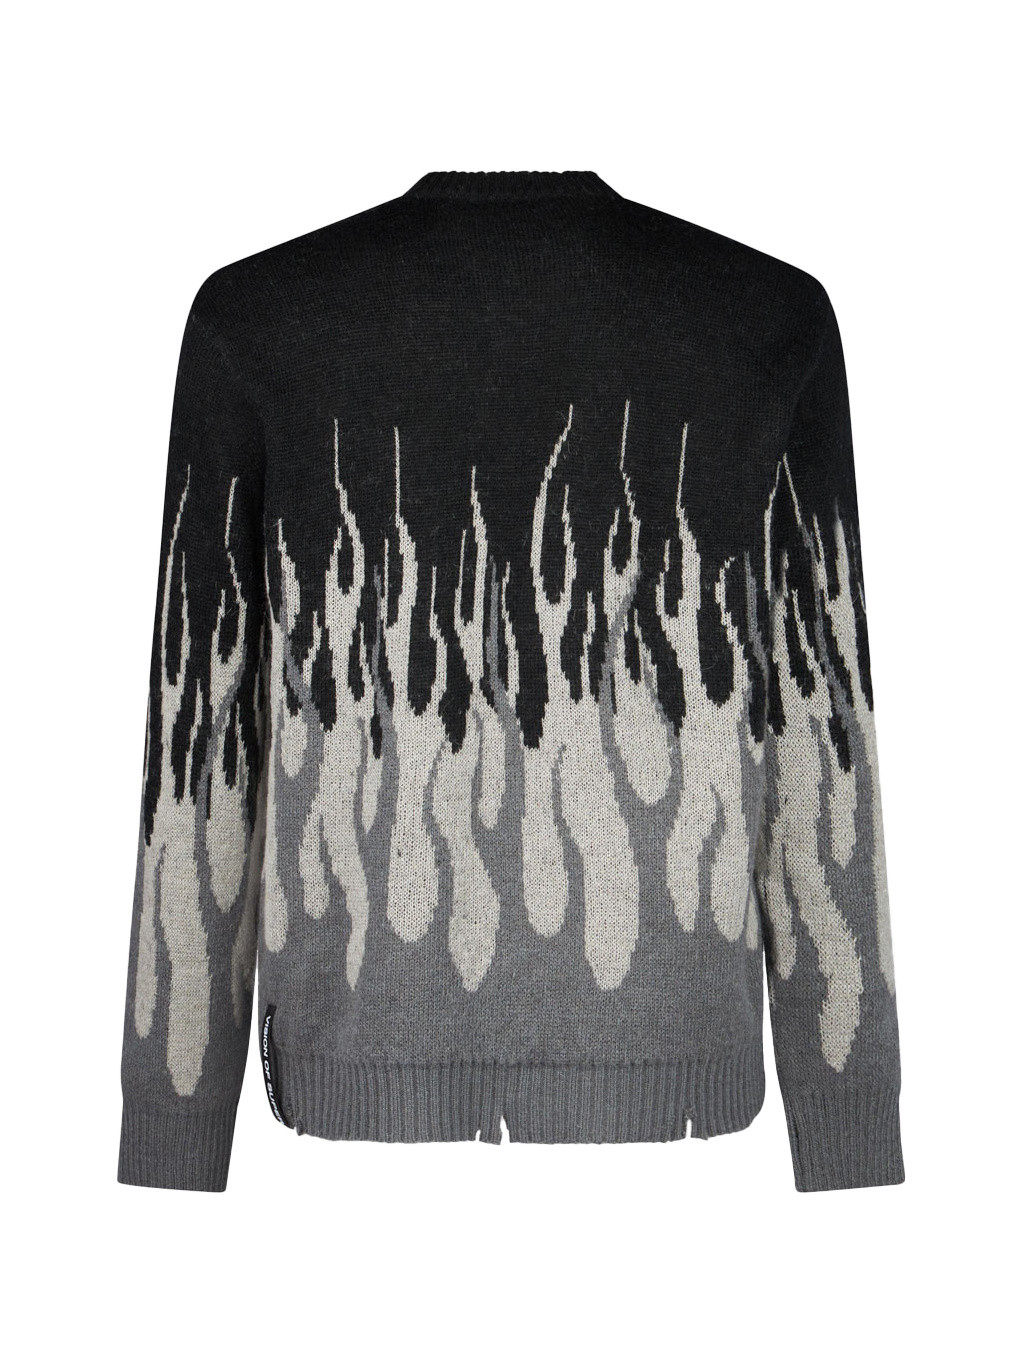 Vision of Super - Double Flame Sweater, Black, large image number 4